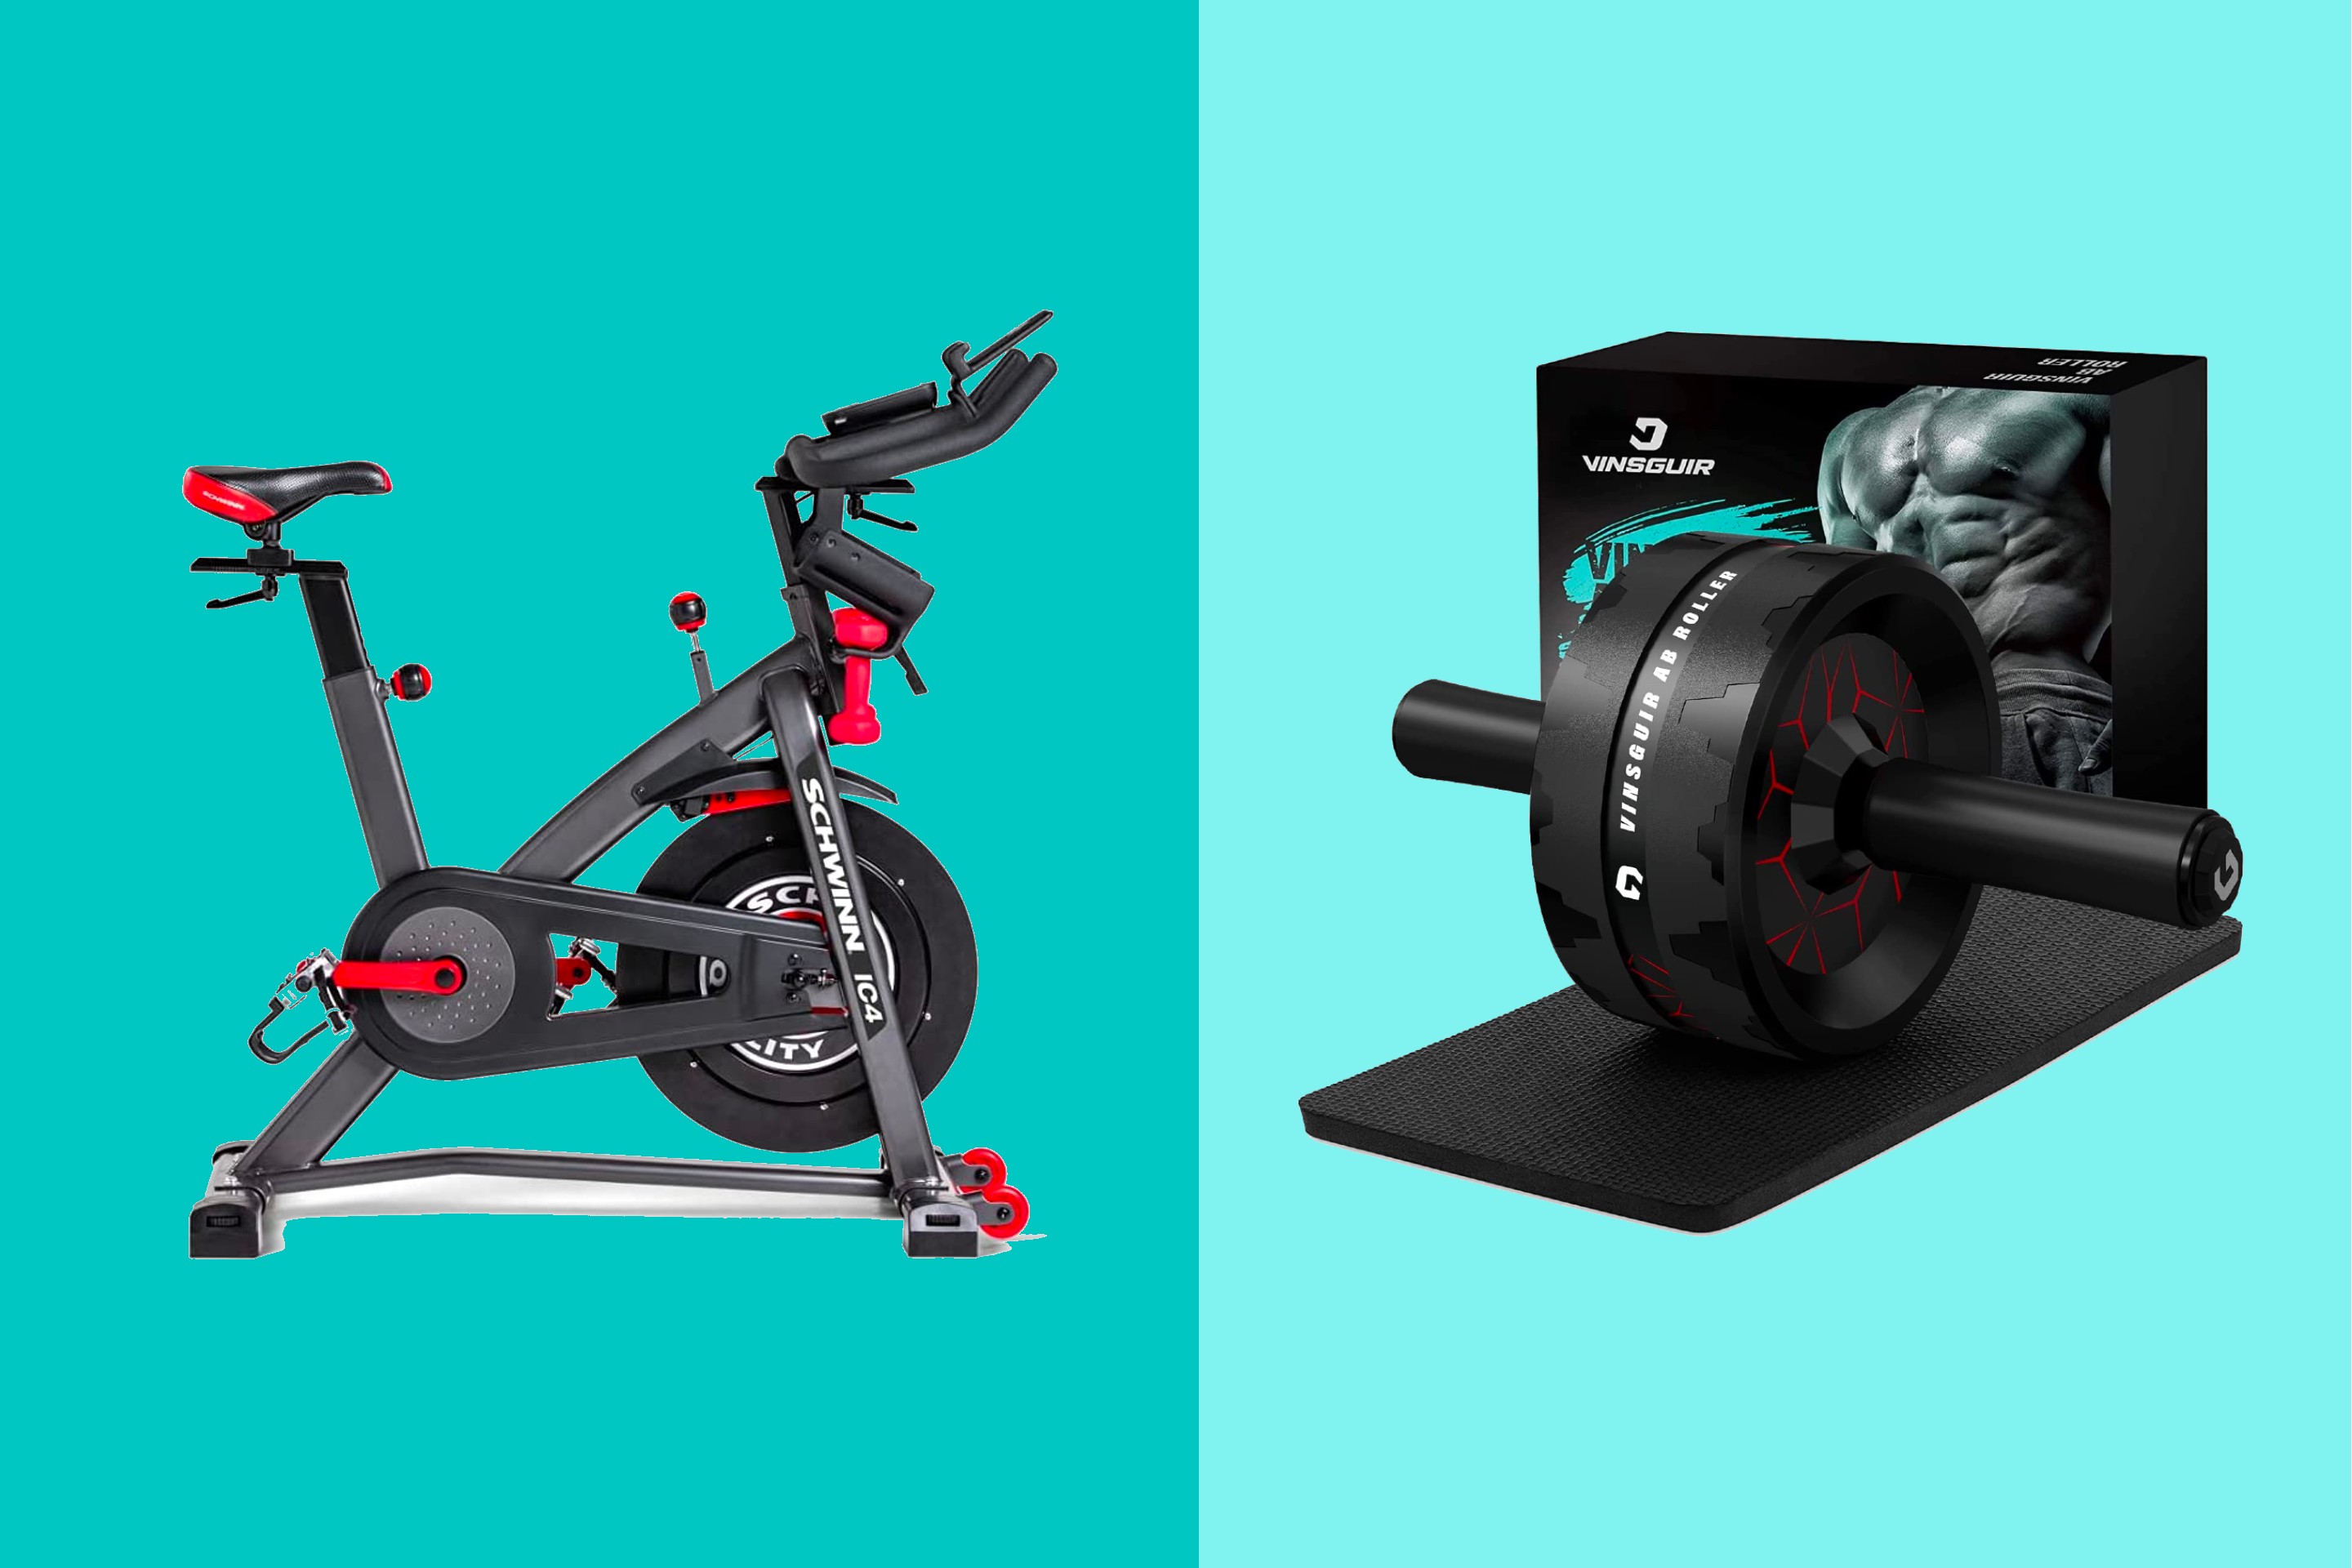 Cancel That Gym Membership: Save Over 50% on Home Gym Equipment From Bowflex and Schwinn